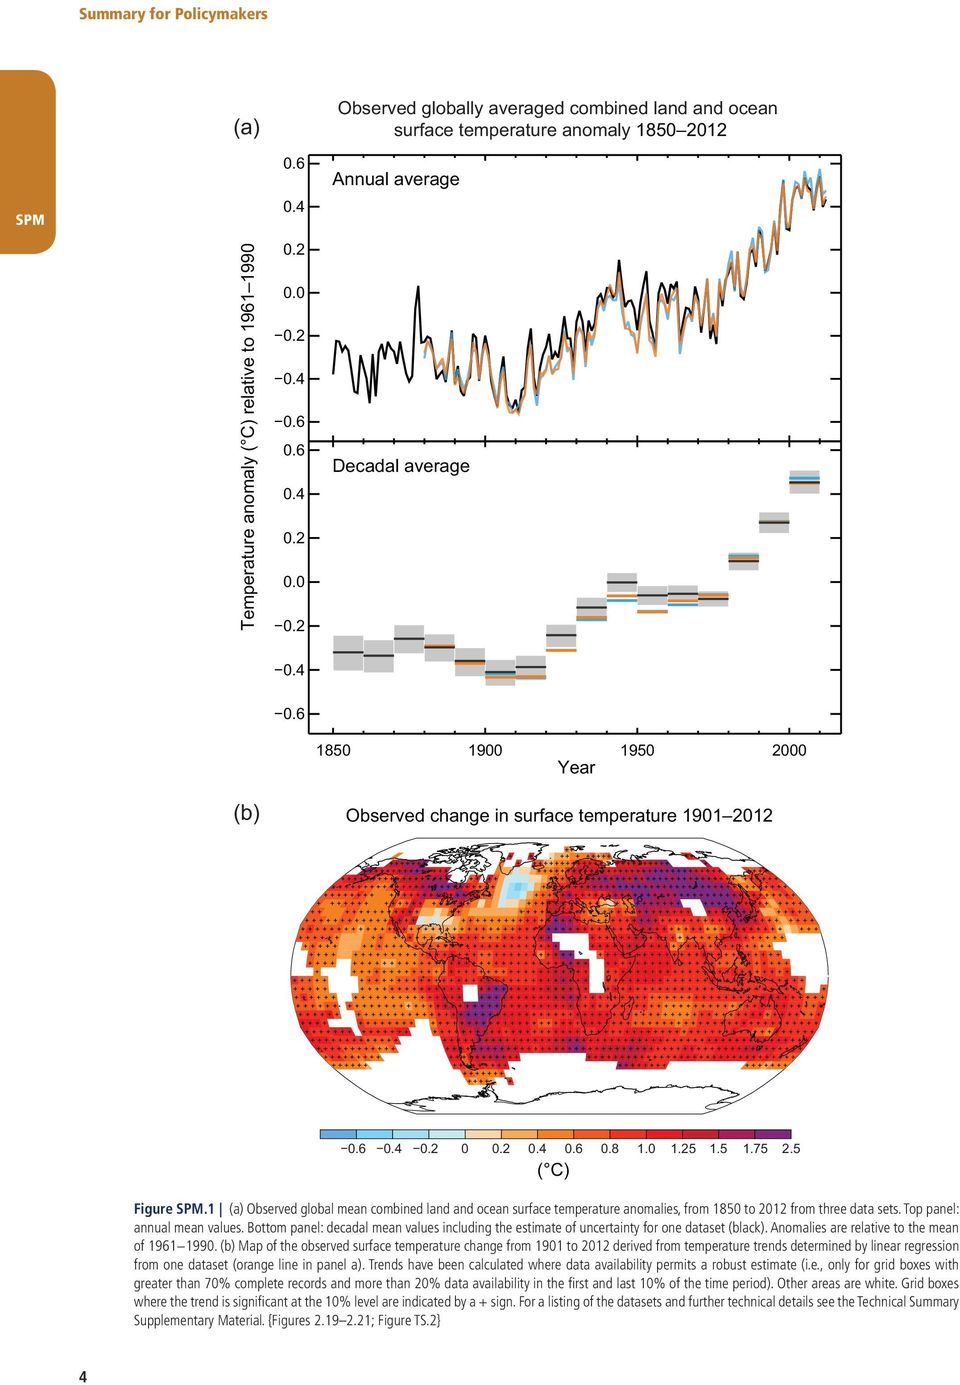 1 (a) Observed global mean combined land and ocean surface temperature anomalies, from 1850 to 2012 from three data sets. Top panel: annual mean values.